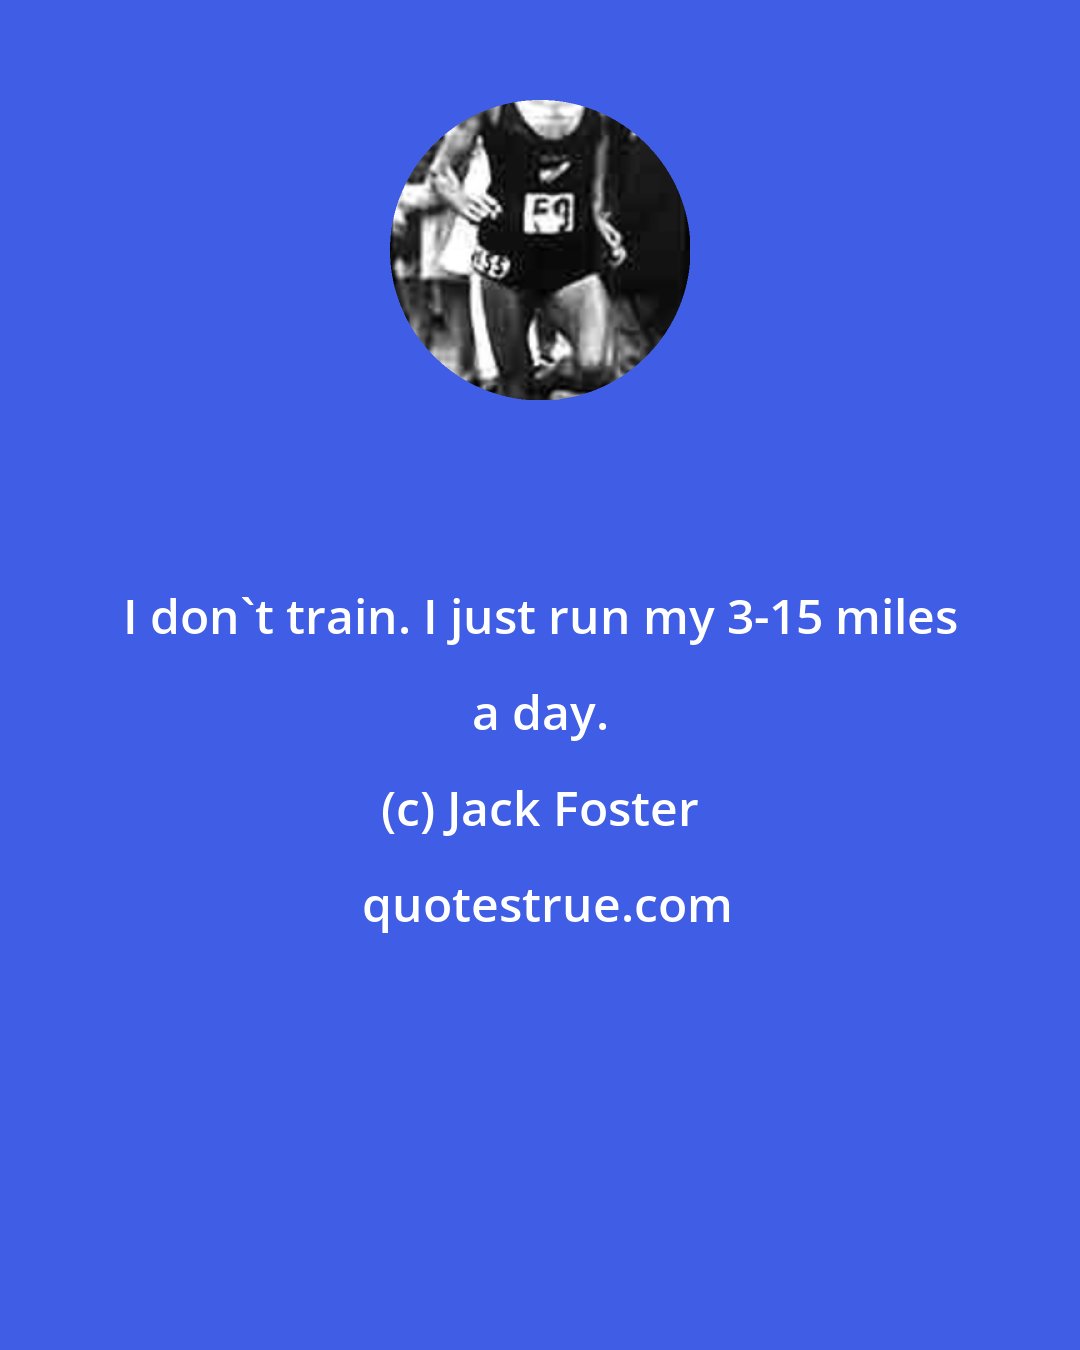 Jack Foster: I don't train. I just run my 3-15 miles a day.